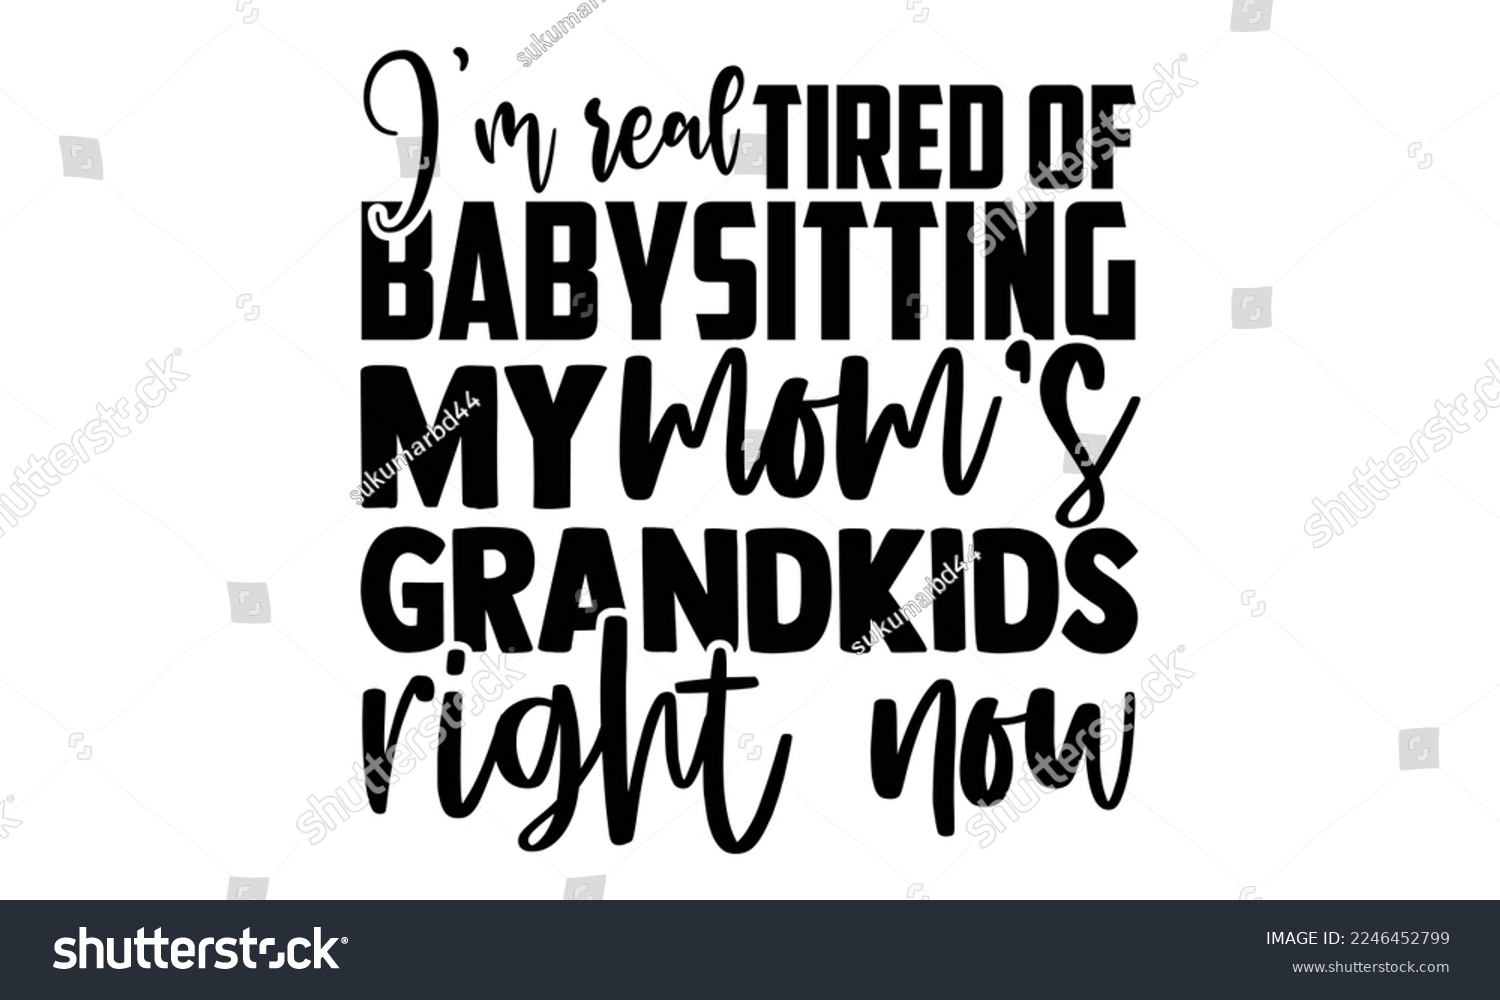 SVG of I’m Real Tired Of Babysitting My Mom’s Grandkids Right Now - Babysitting svg quotes Design, Cutting Machine, Silhouette Cameo, t-shirt, Hand drawn lettering phrase isolated on white background svg